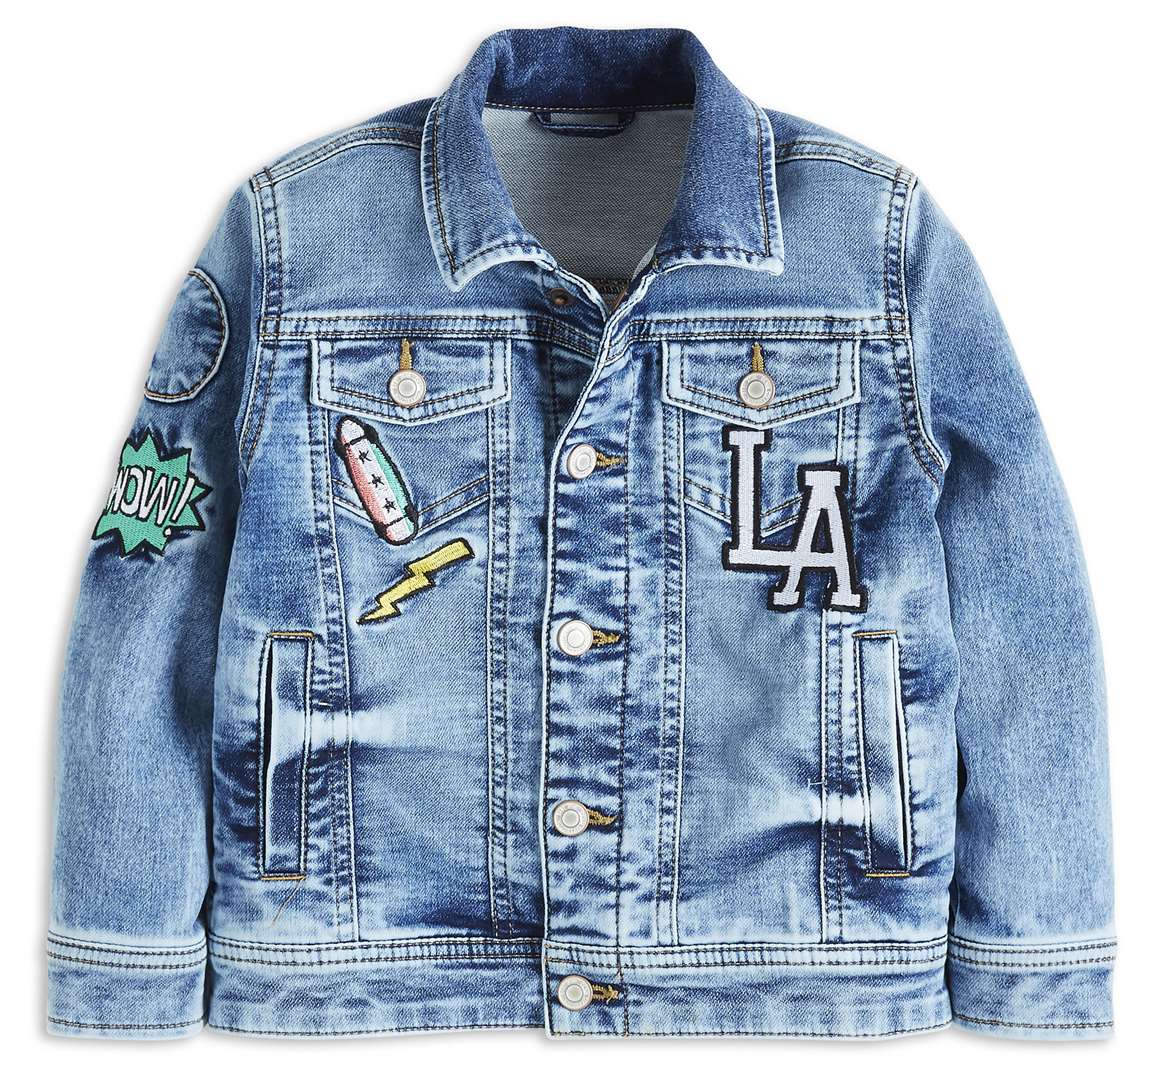 Denim jackets are set to be big news this year. Deck your littl'un out in this soft, jersey version, for comfort and cred. Lindex Jersey Denim Jacket, available in sizes 128-170, £24.99 (www.lindex.com)